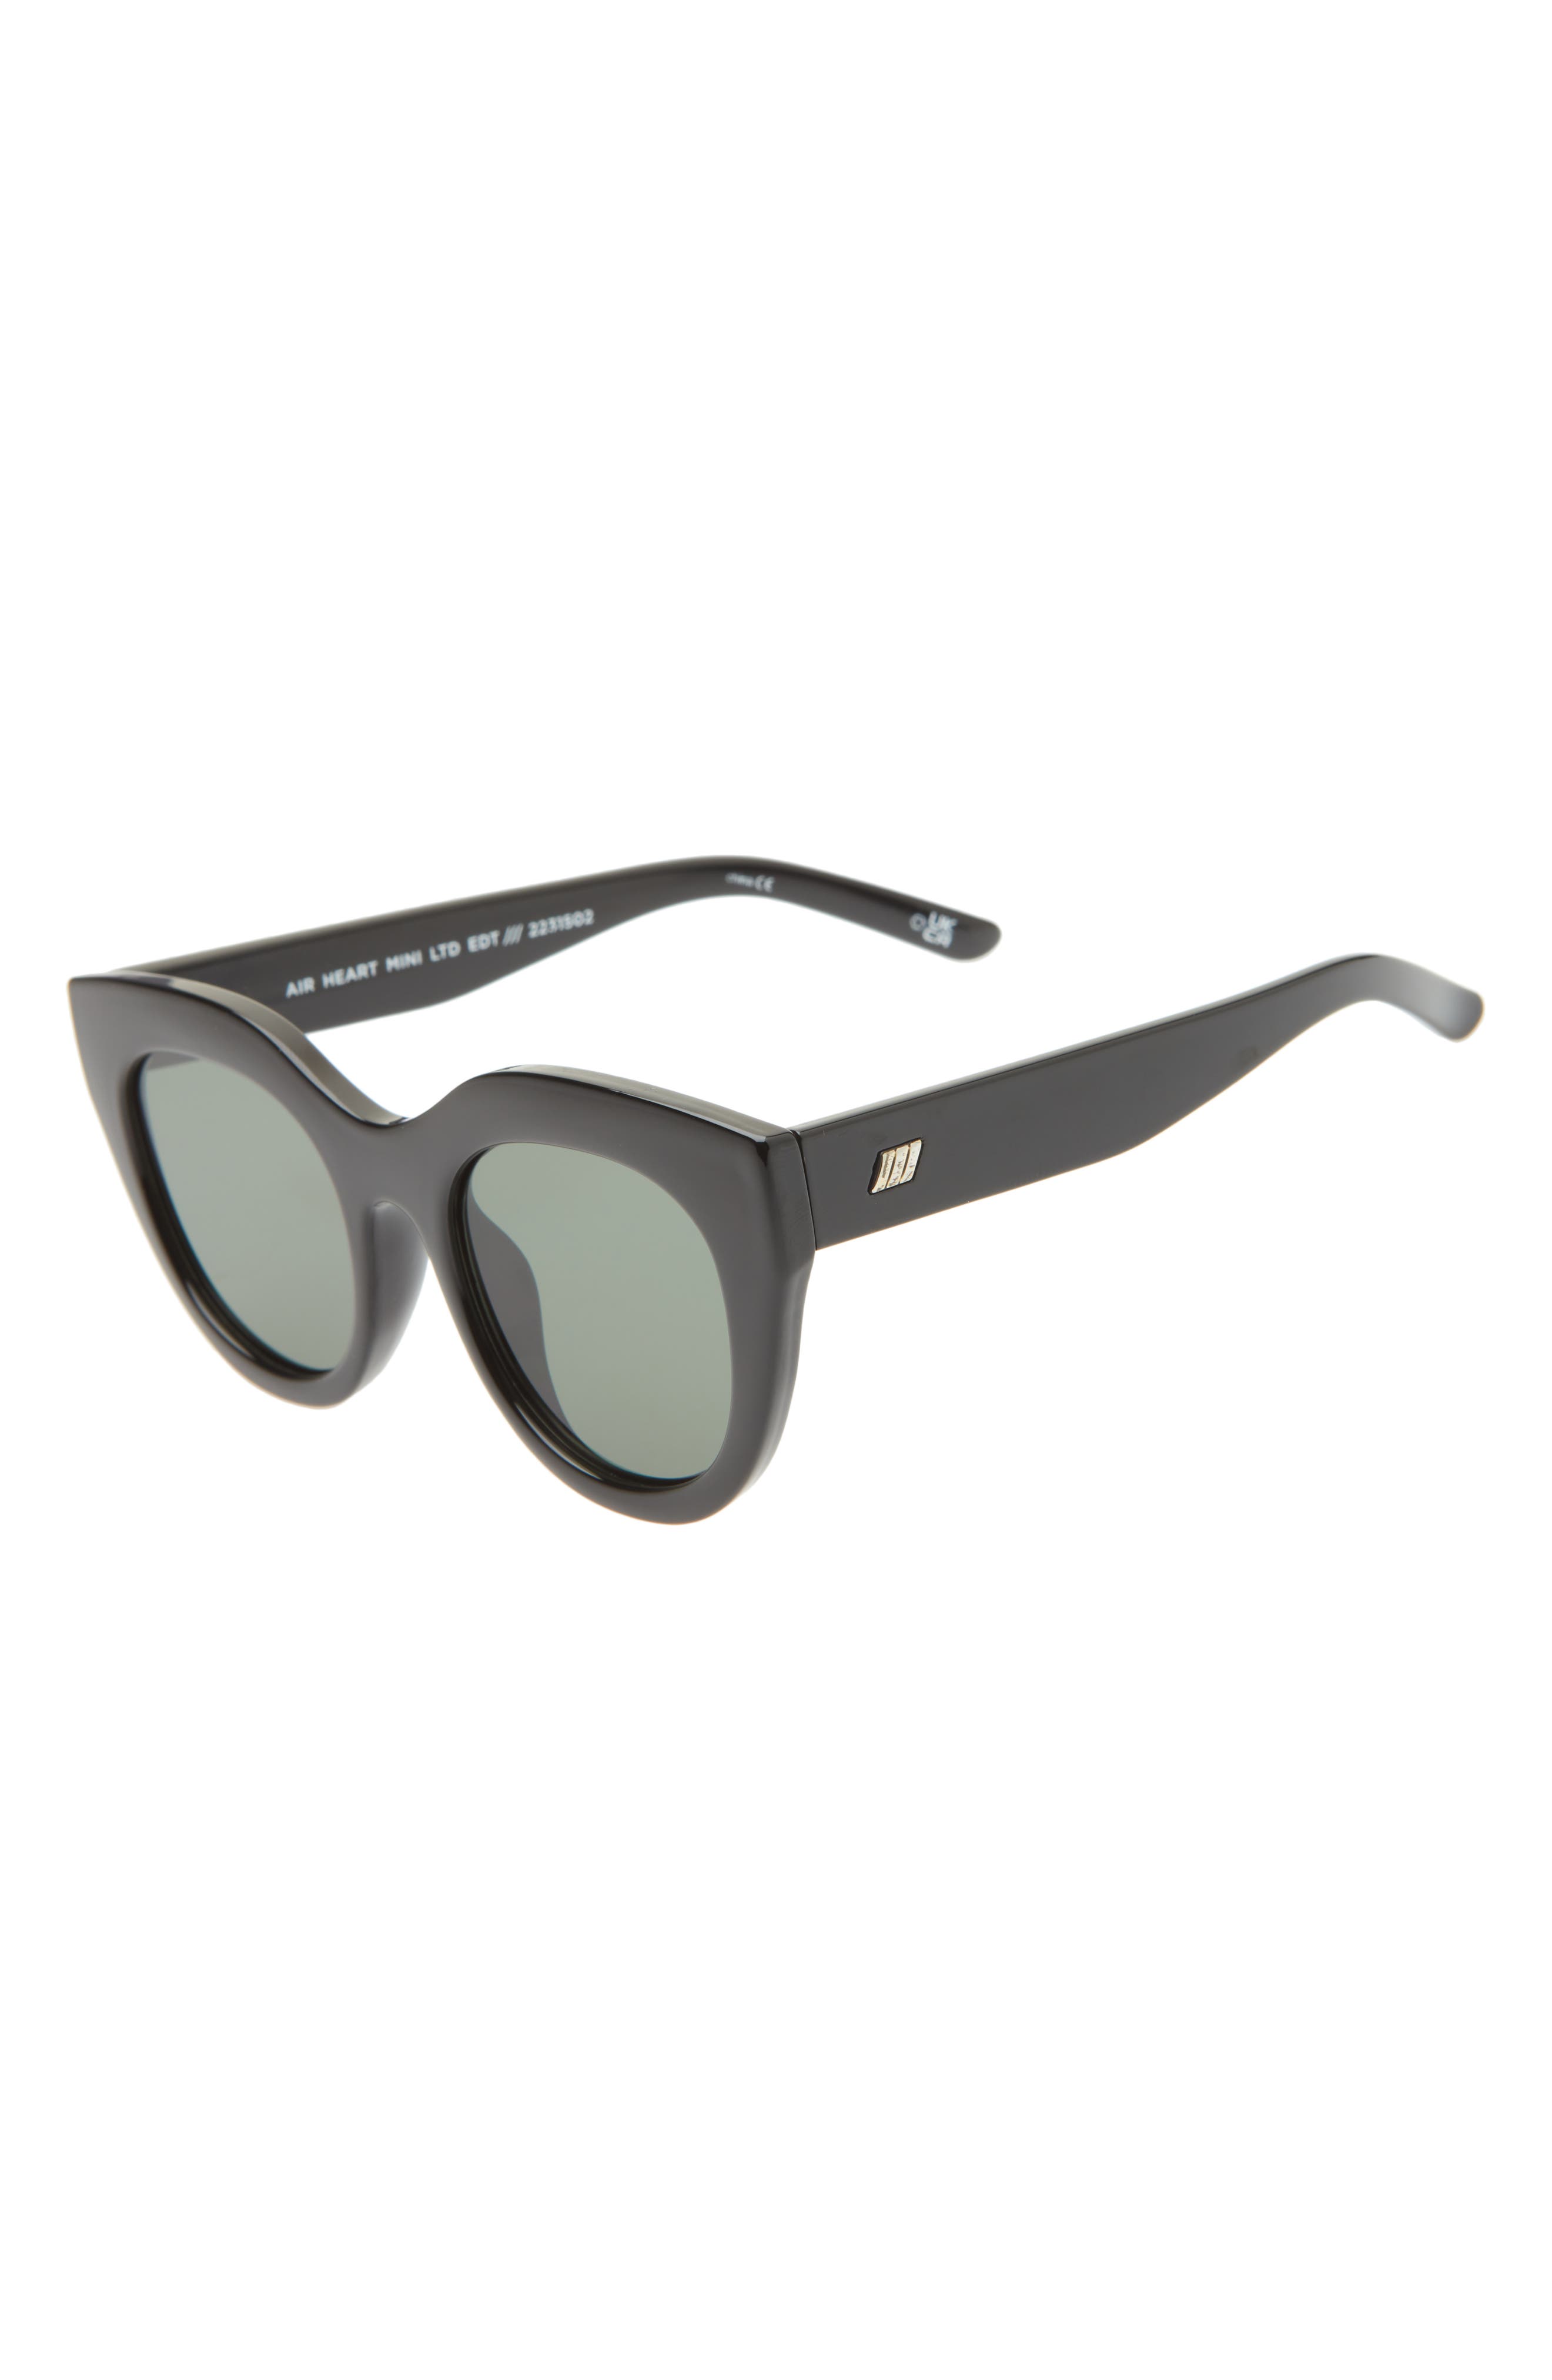 Le Specs Air Heart 45mm Cat Eye Sunglasses in Black at Nordstrom